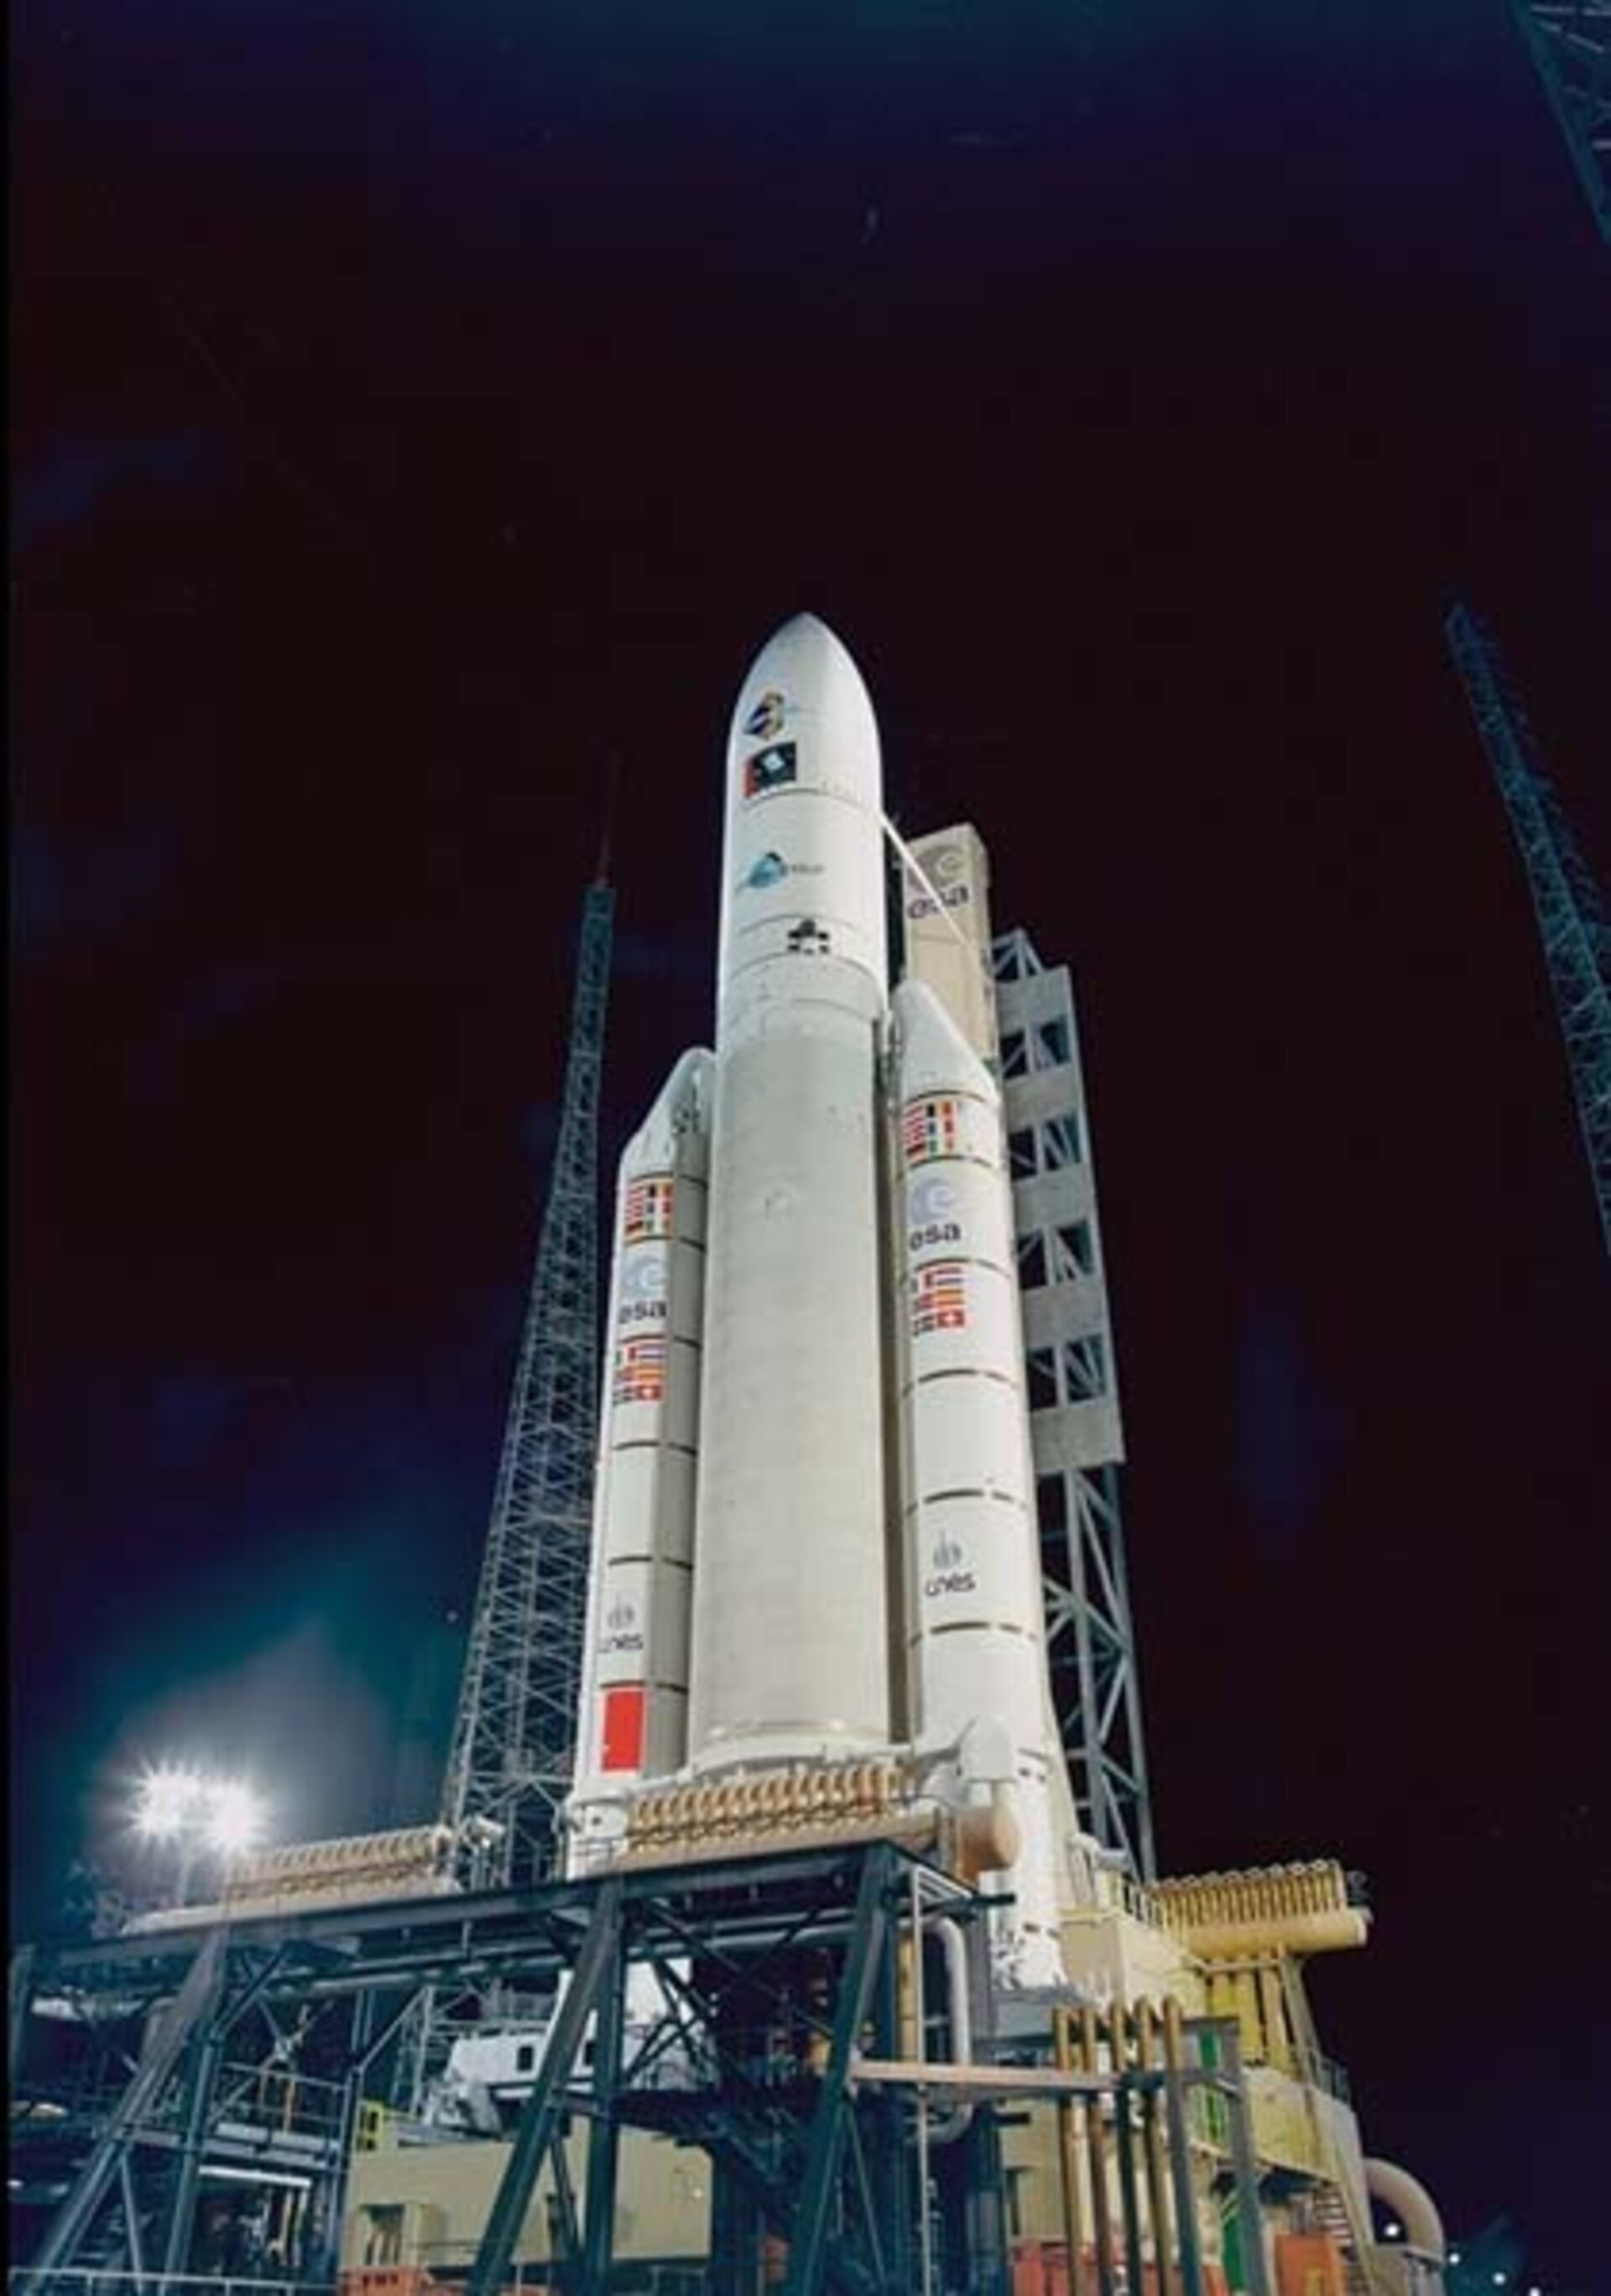 Ar-503 on the launch pad